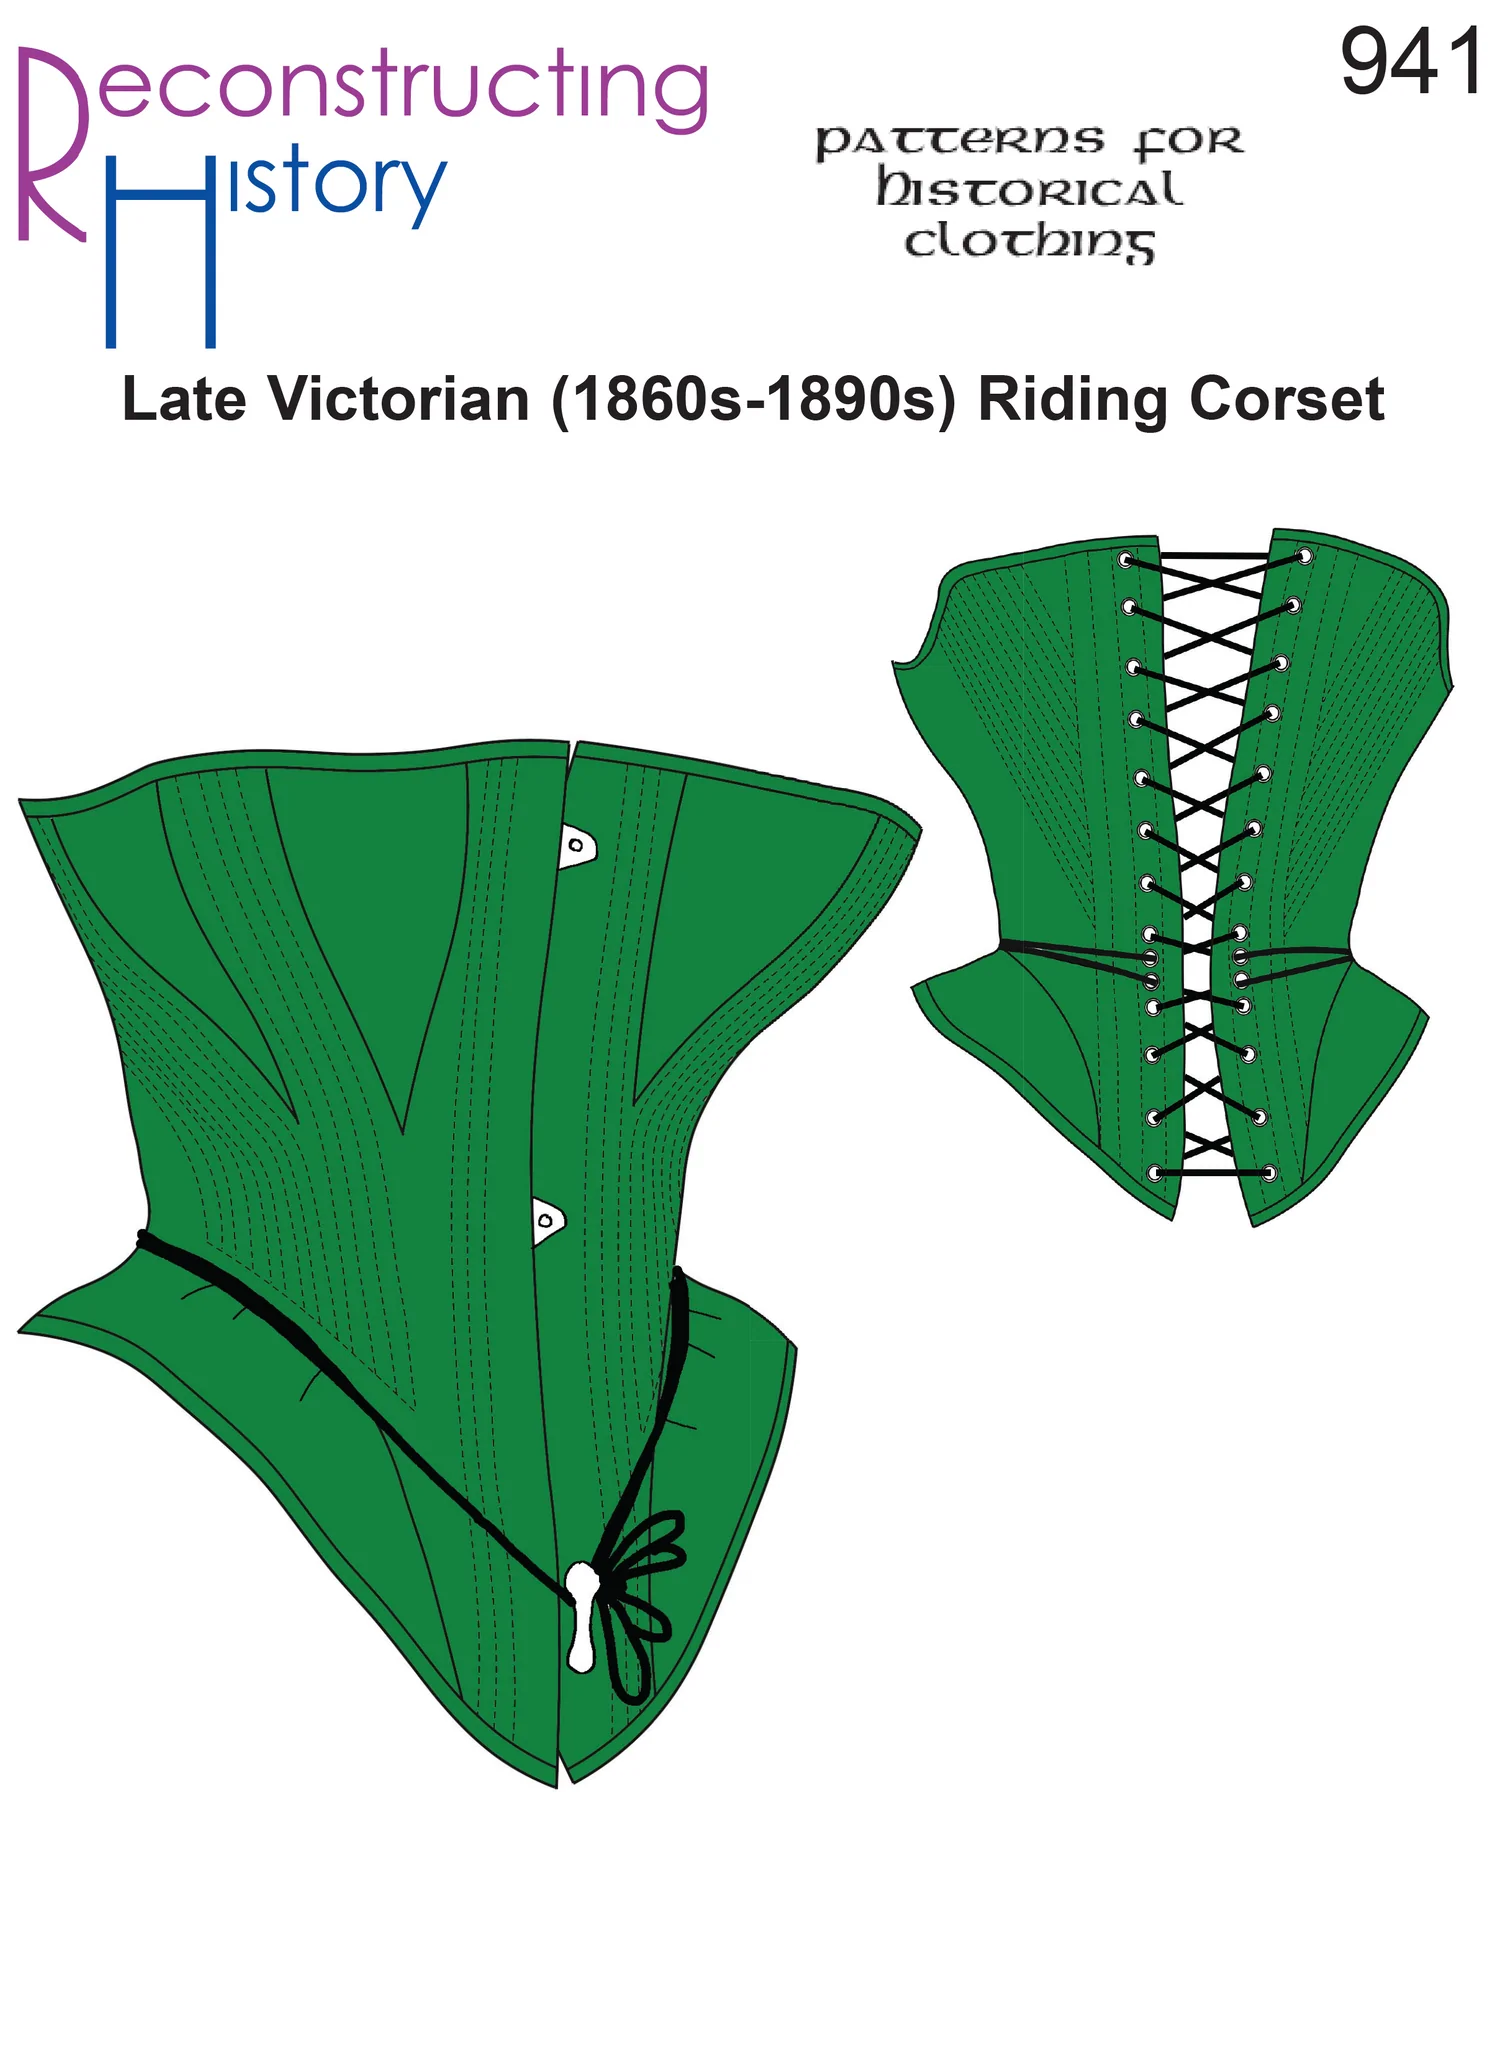 Reconstructing History #RH941 - Late Victorian (1860s-1890s) Riding Corset